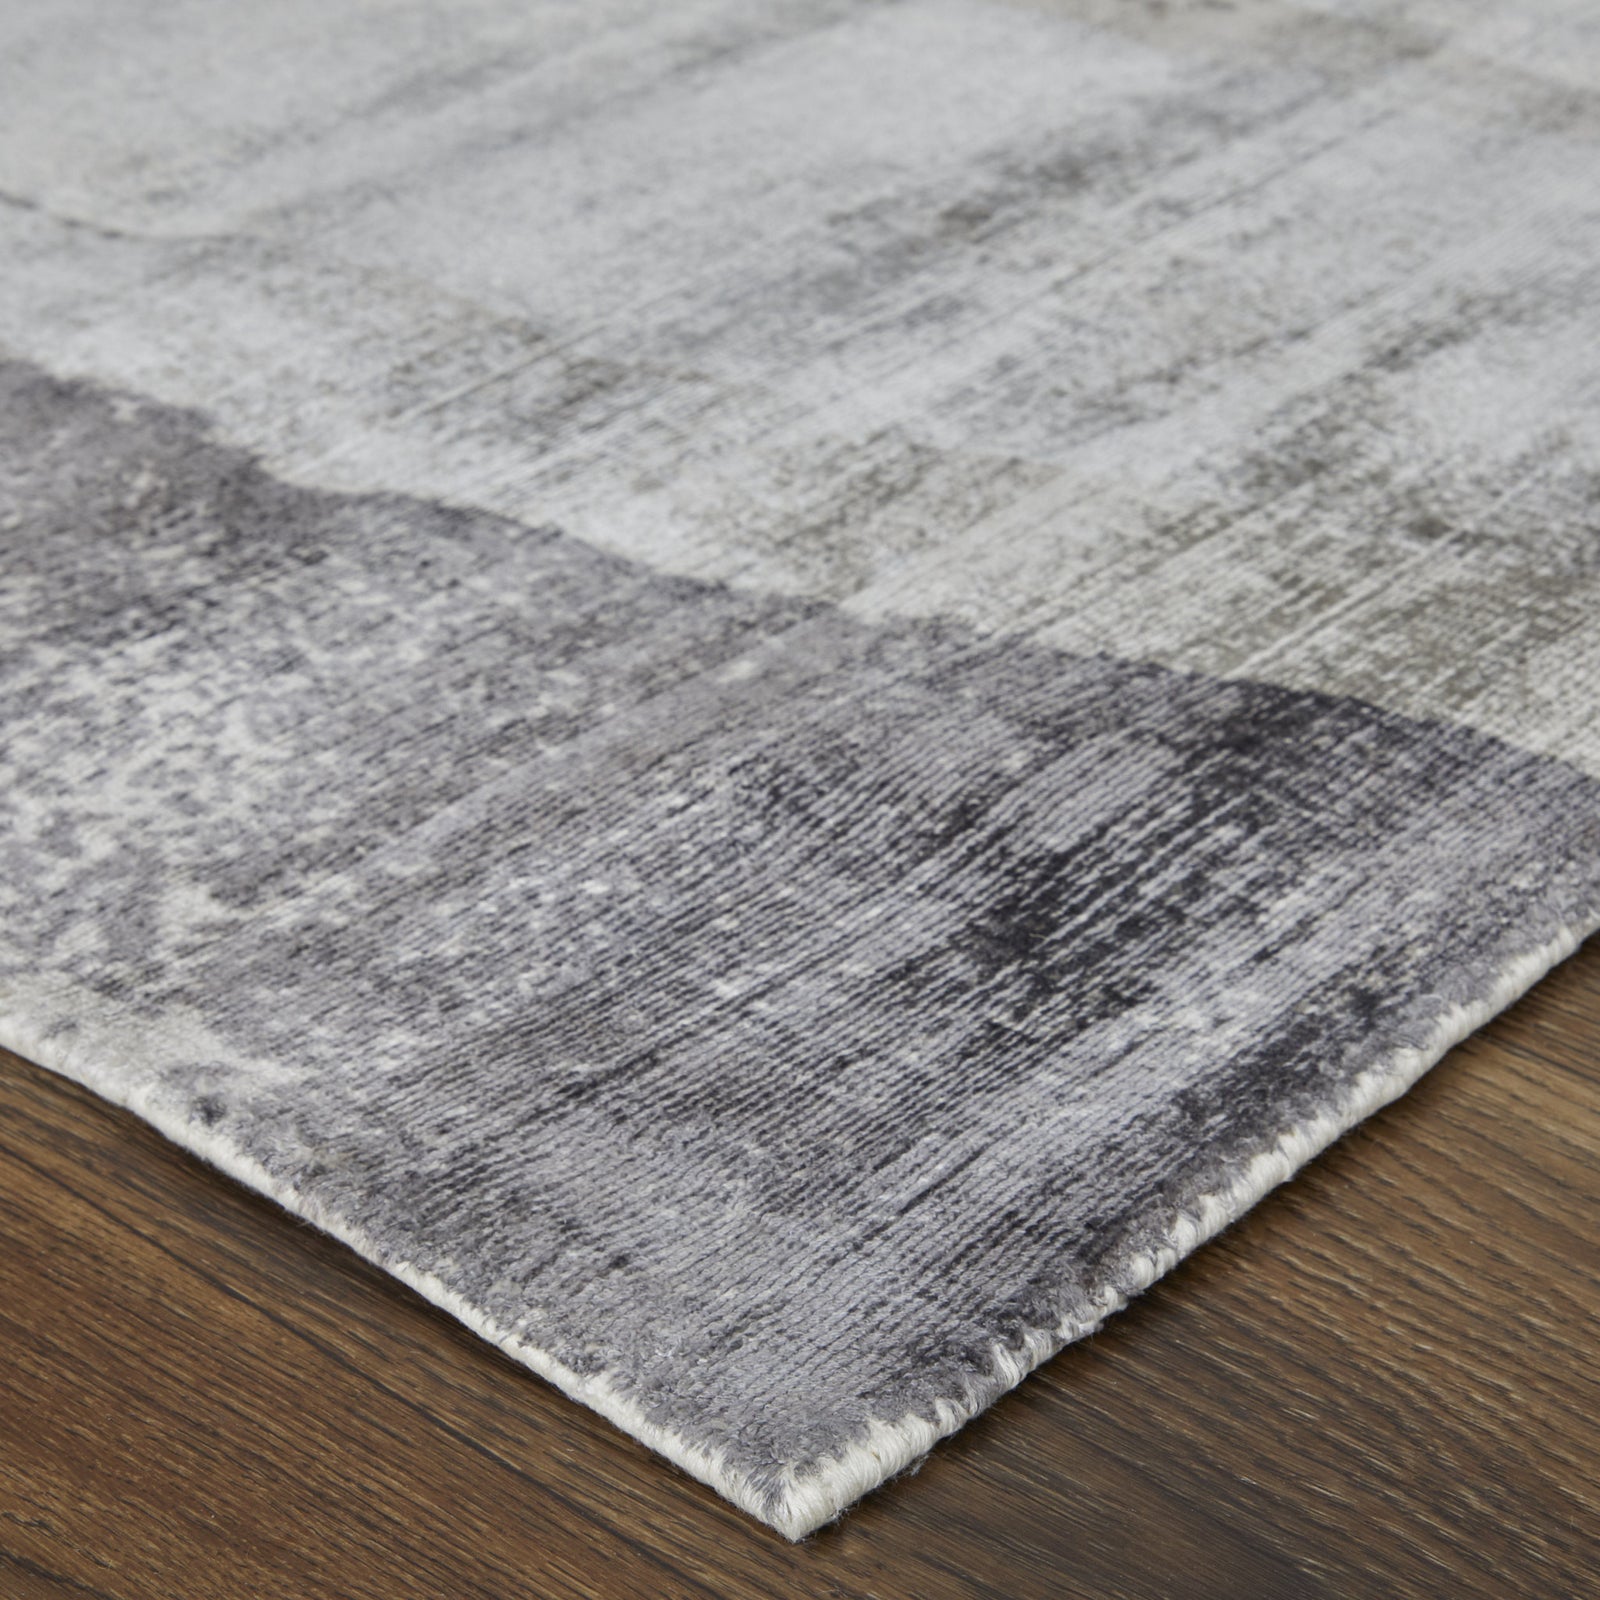 2' X 3' Gray Taupe And Ivory Abstract Hand Woven Area Rug